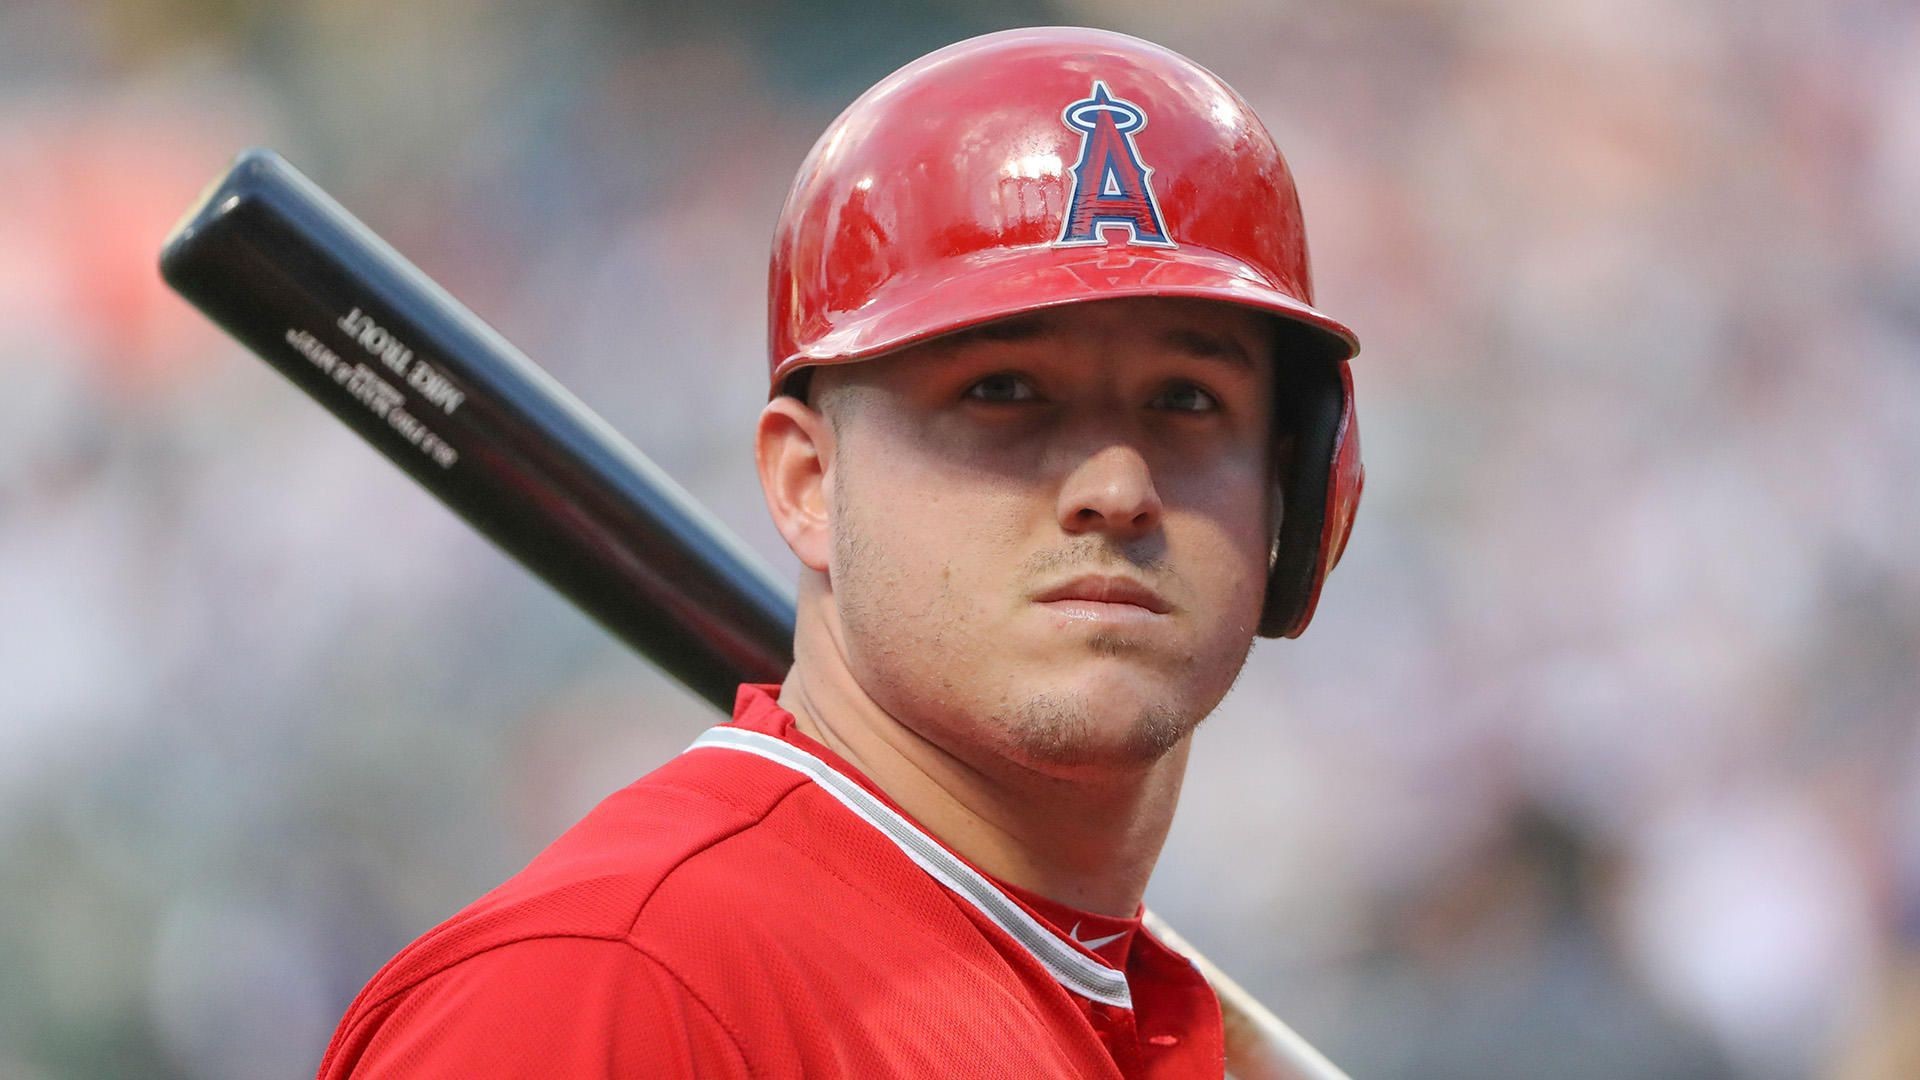 1920x1080 Mike Trout Images